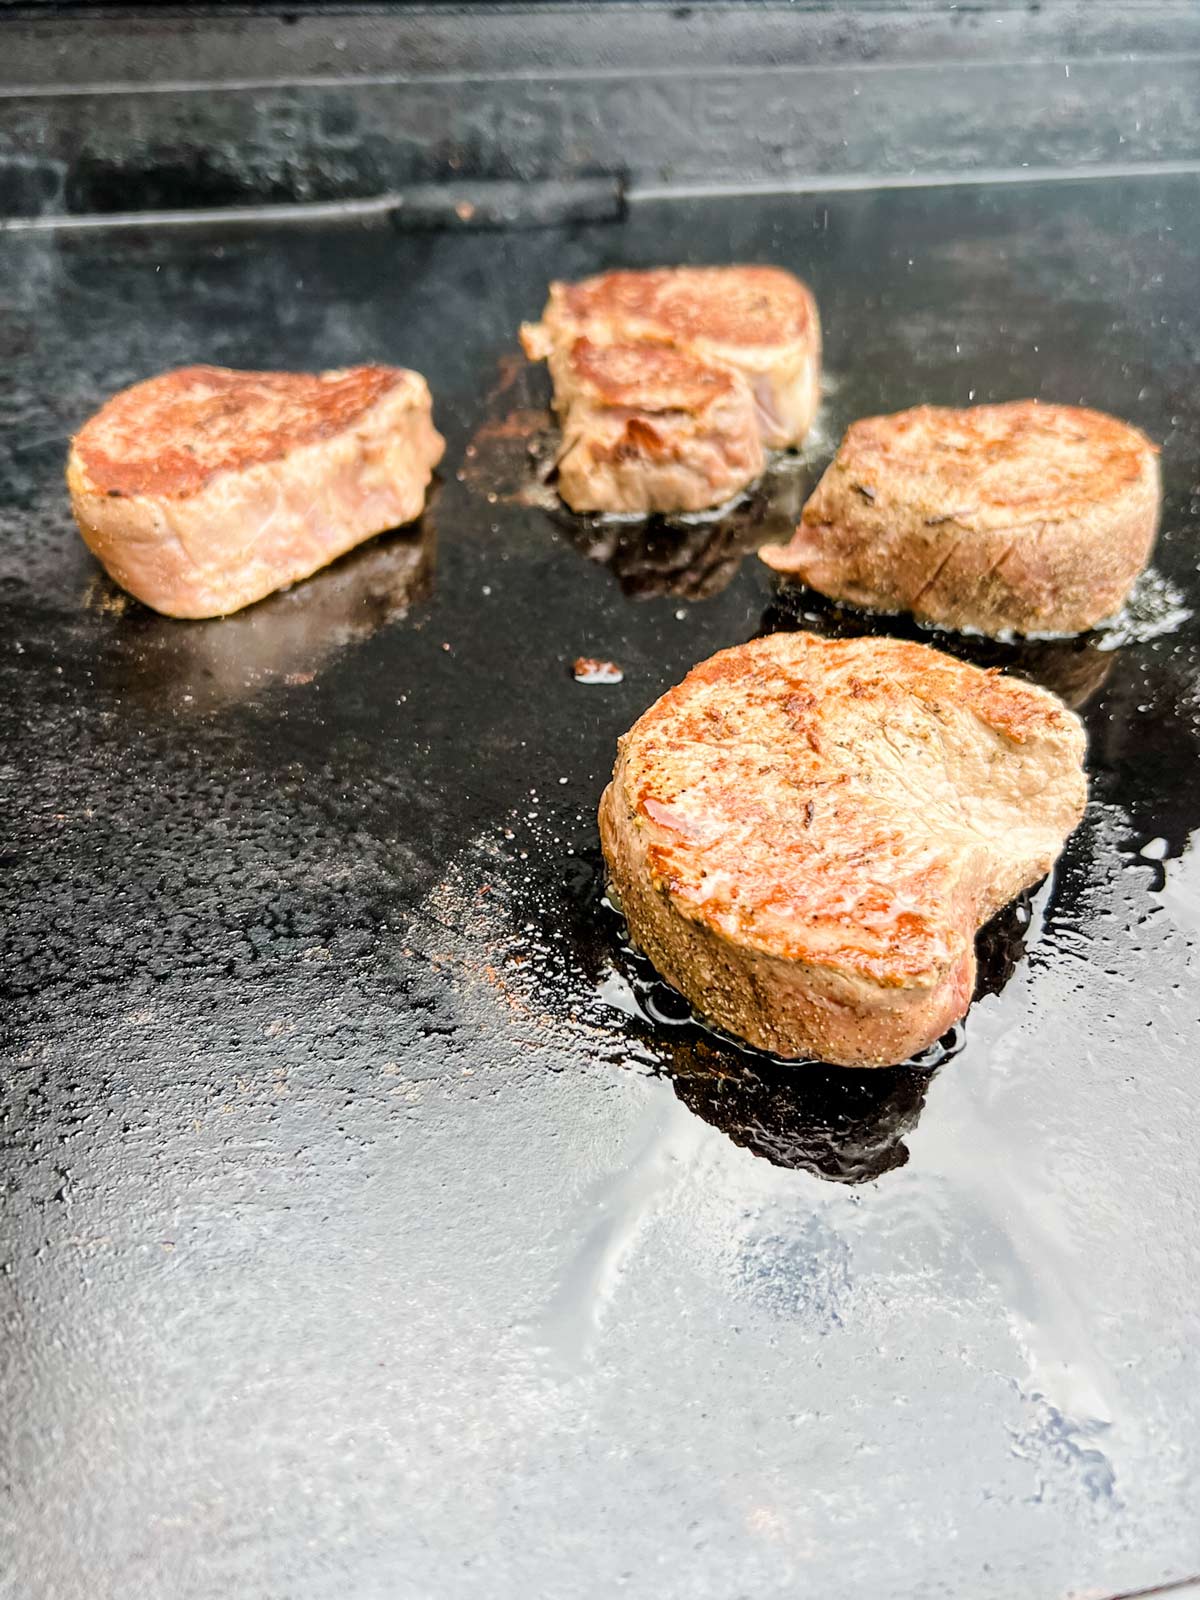 Filet mignon cooking on a Blackstone Griddle.